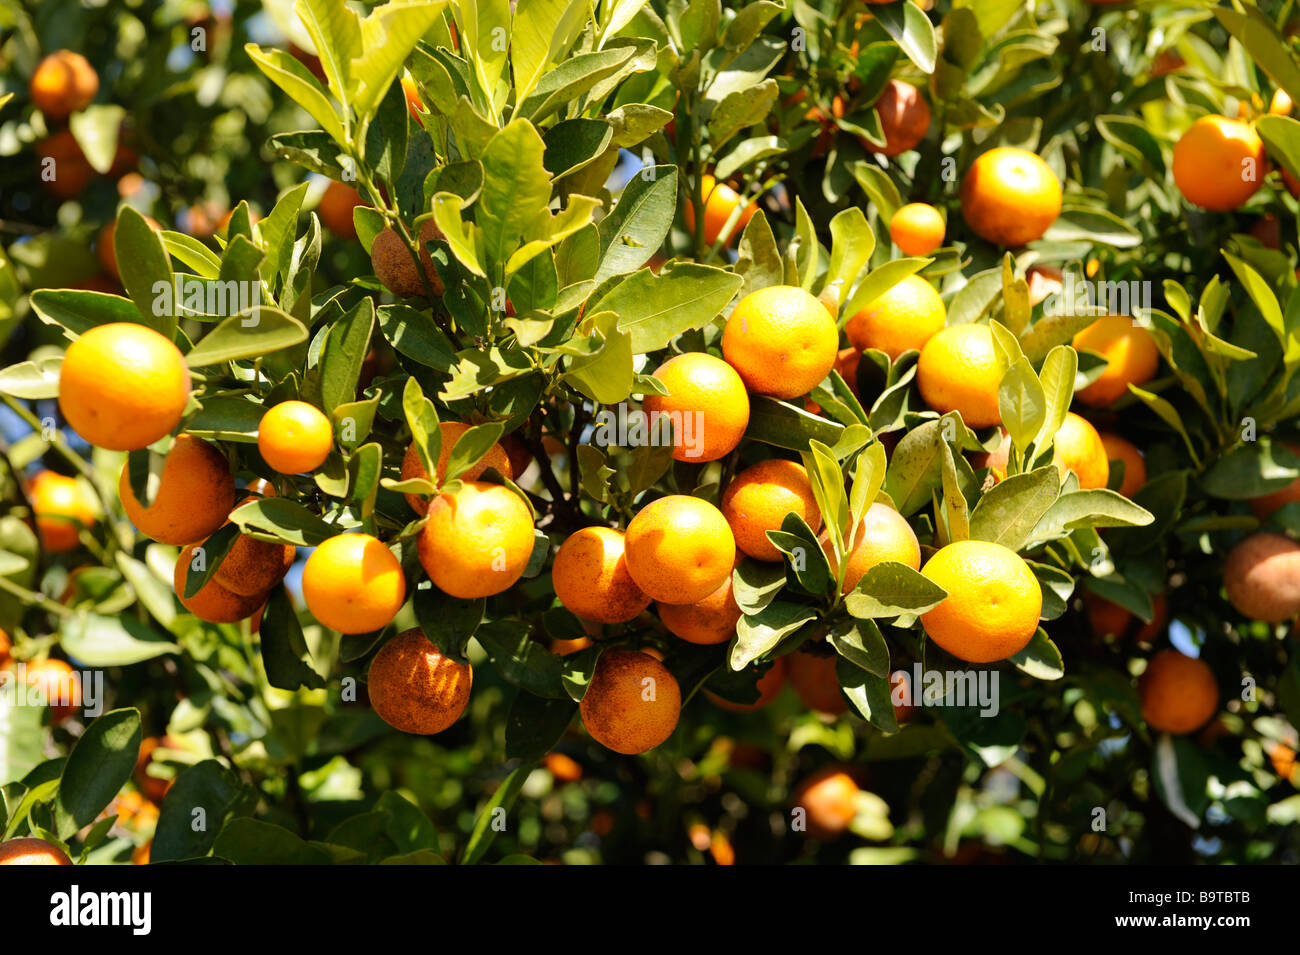 Orange trees loaded with fruit in Central Florida Stock Photo